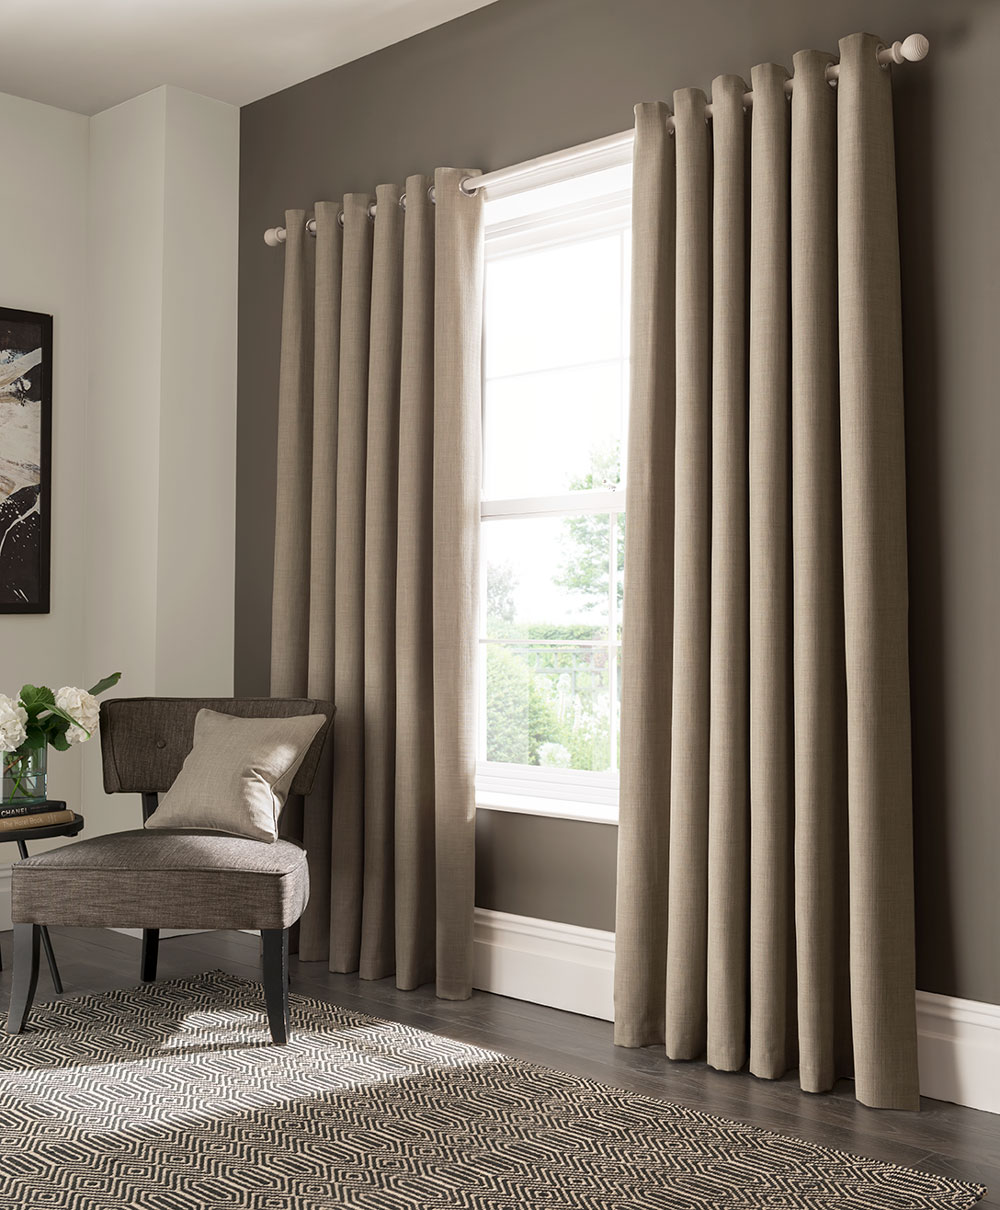 Elba Eyelet Curtains Ready Made Curtains - Linen - by Studio G